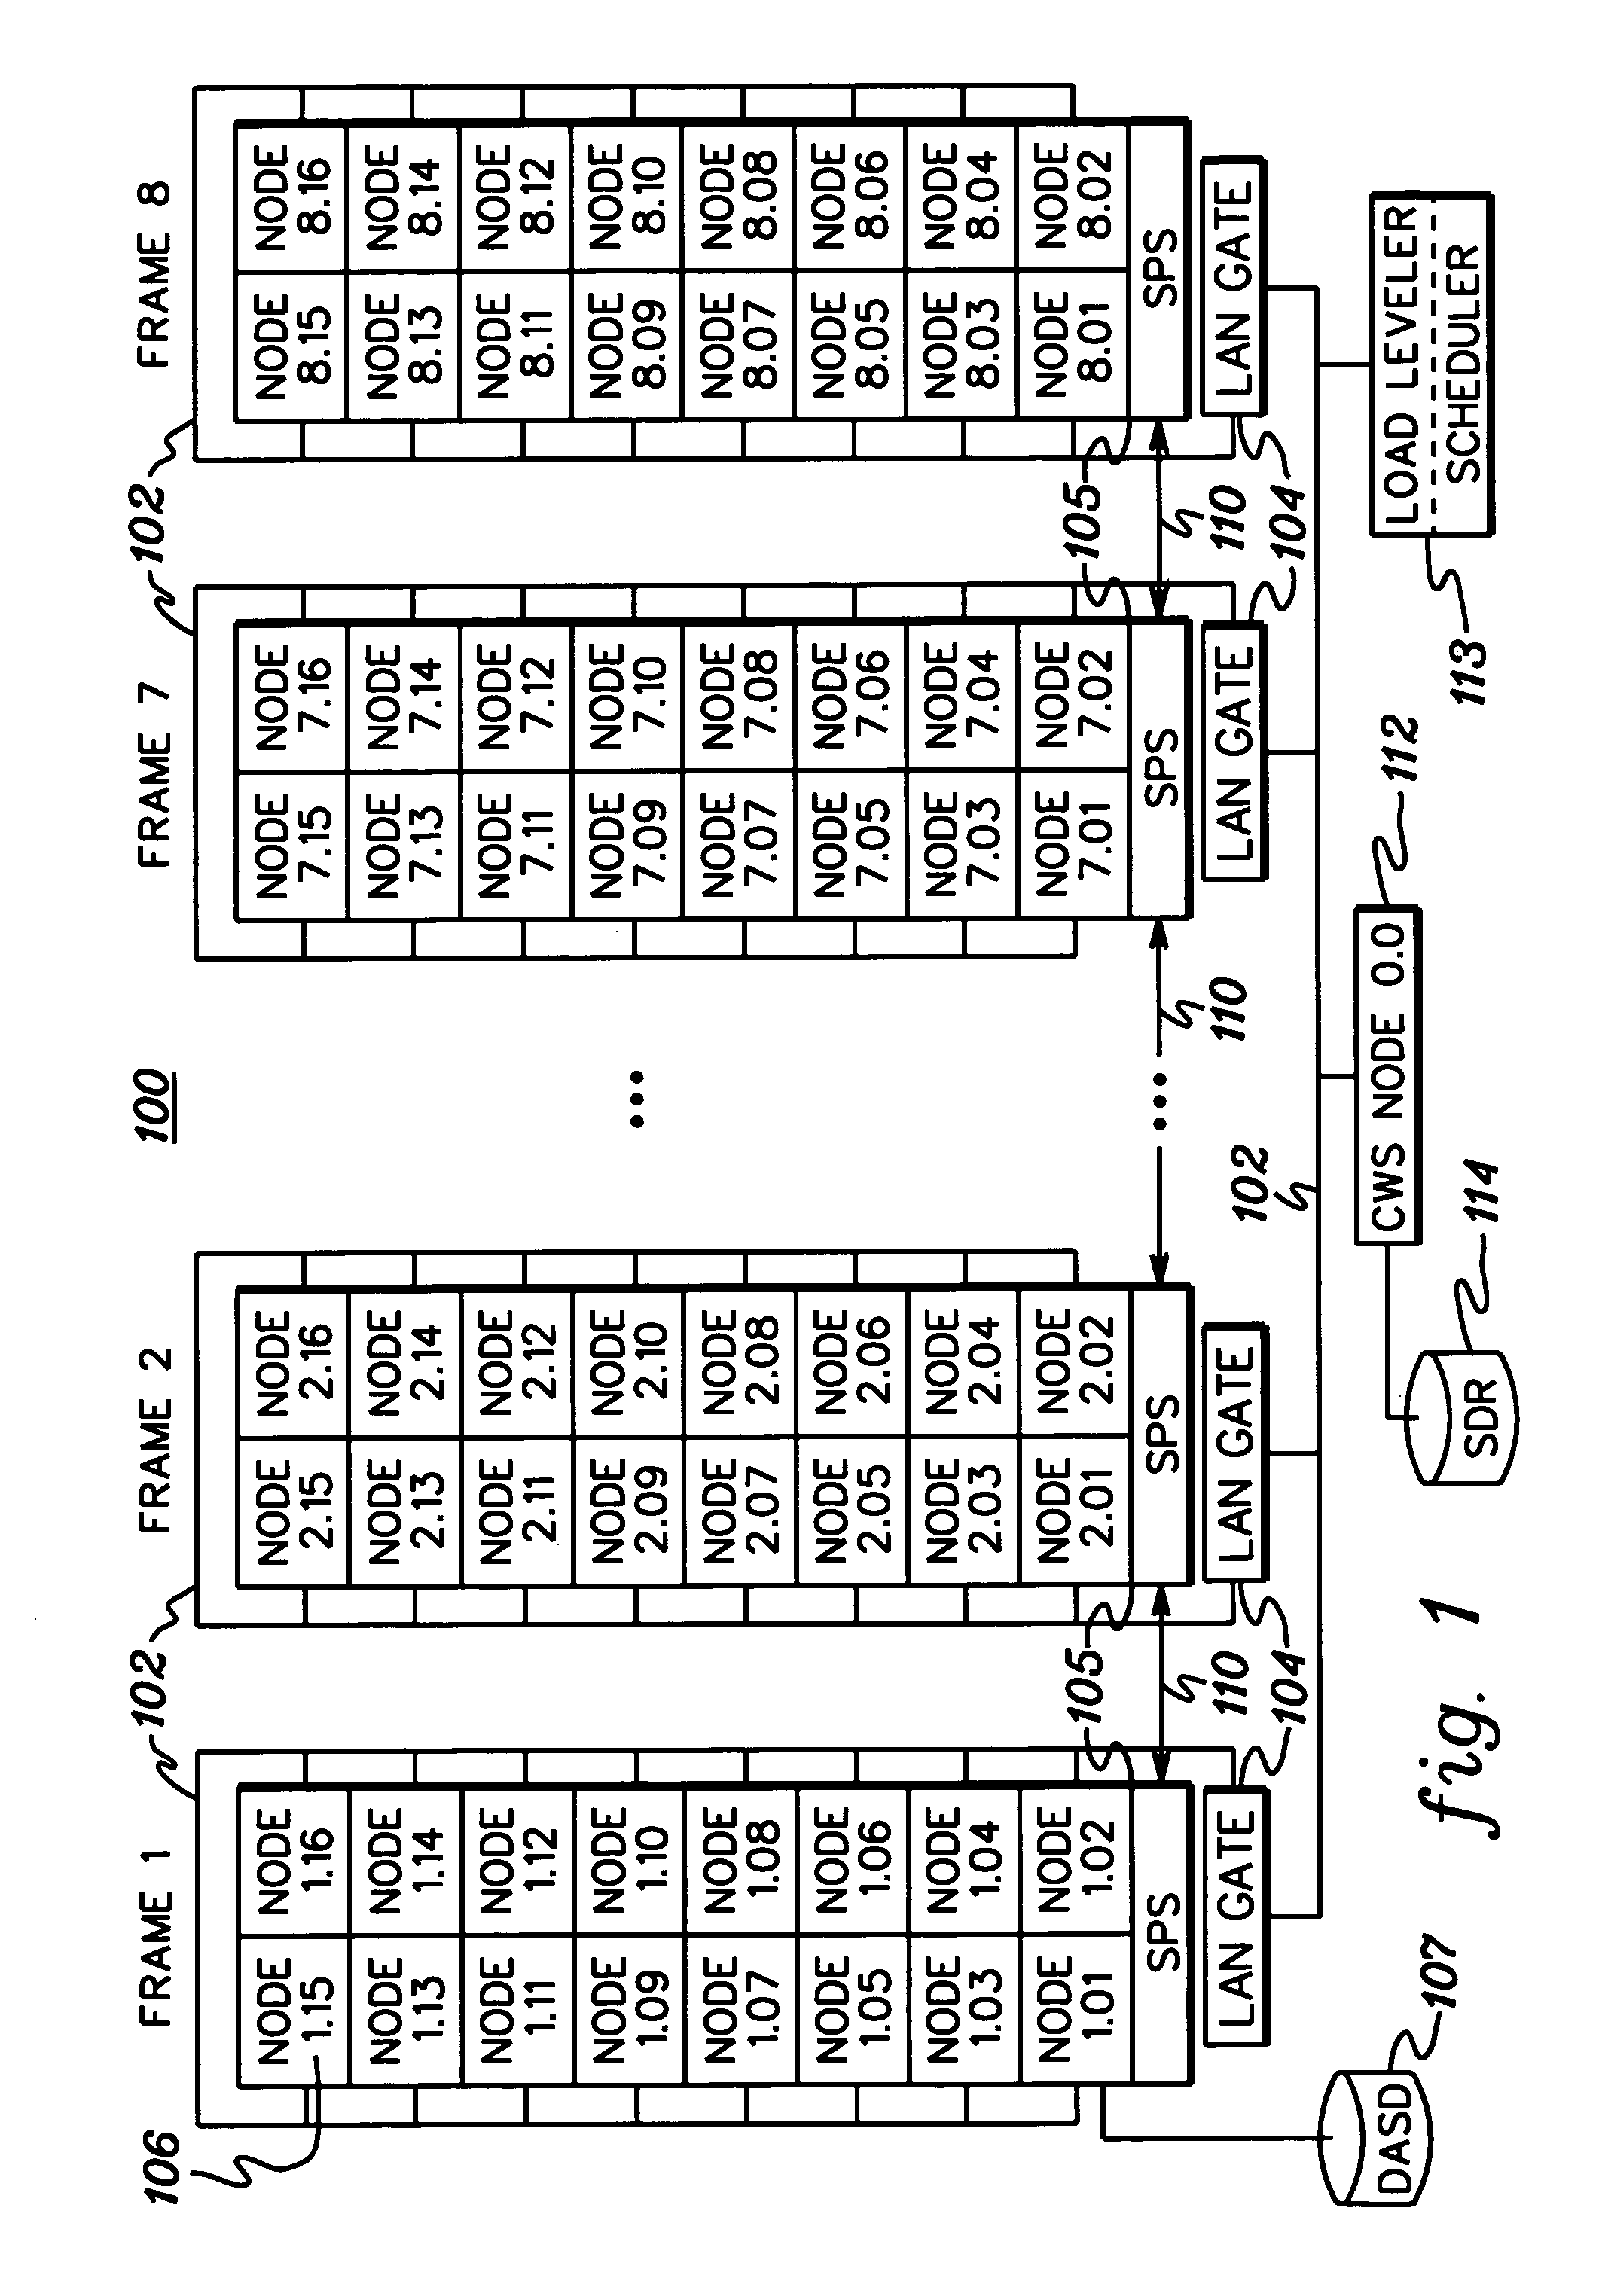 Facilitating scheduling of jobs by decoupling job scheduling algorithm from recorded resource usage and allowing independent manipulation of recorded resource usage space